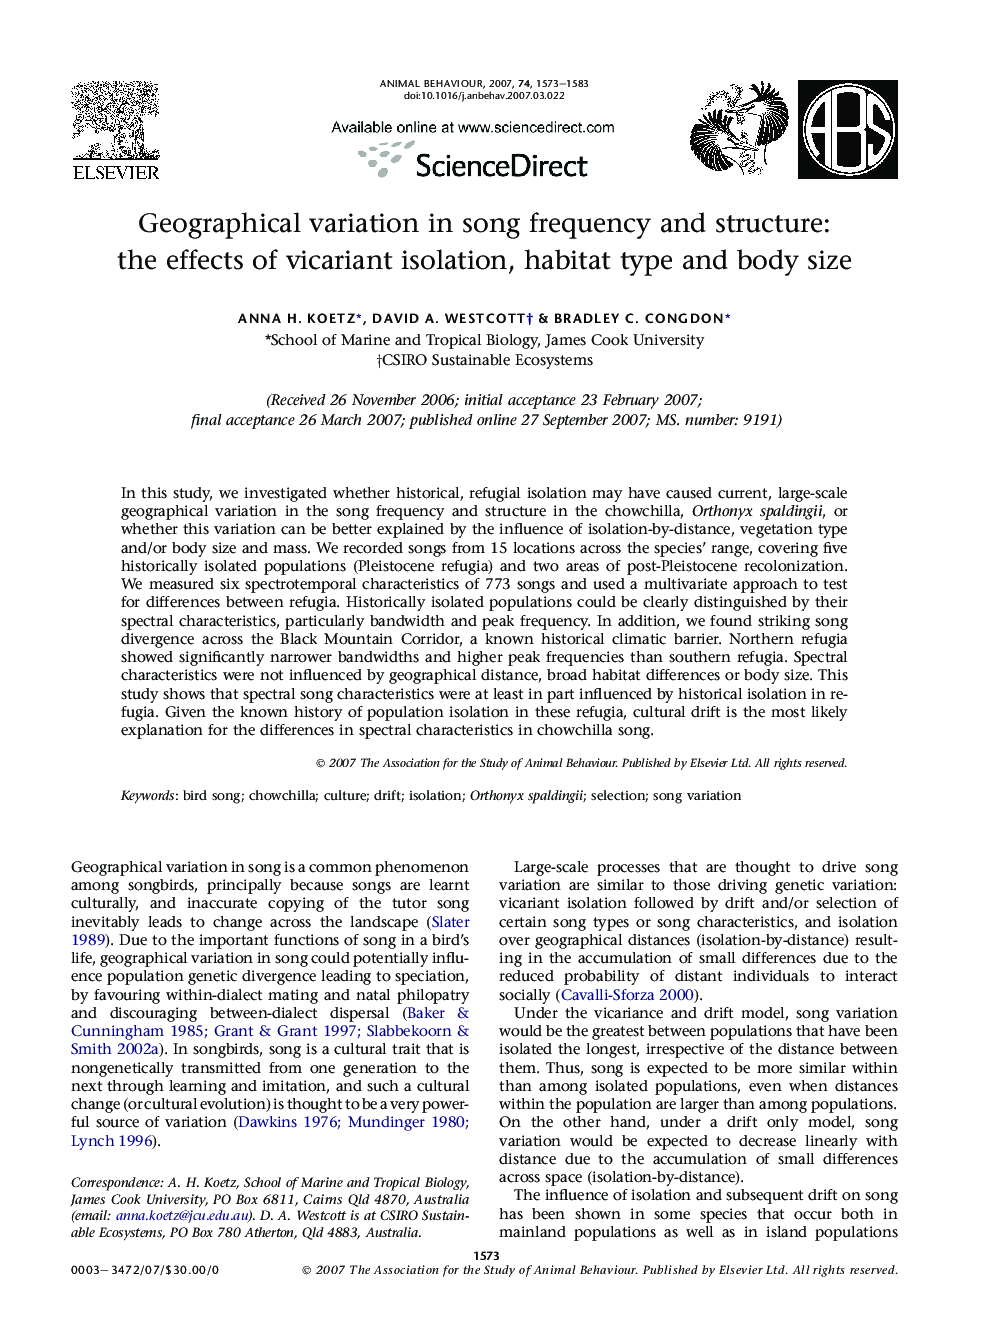 Geographical variation in song frequency and structure: the effects of vicariant isolation, habitat type and body size